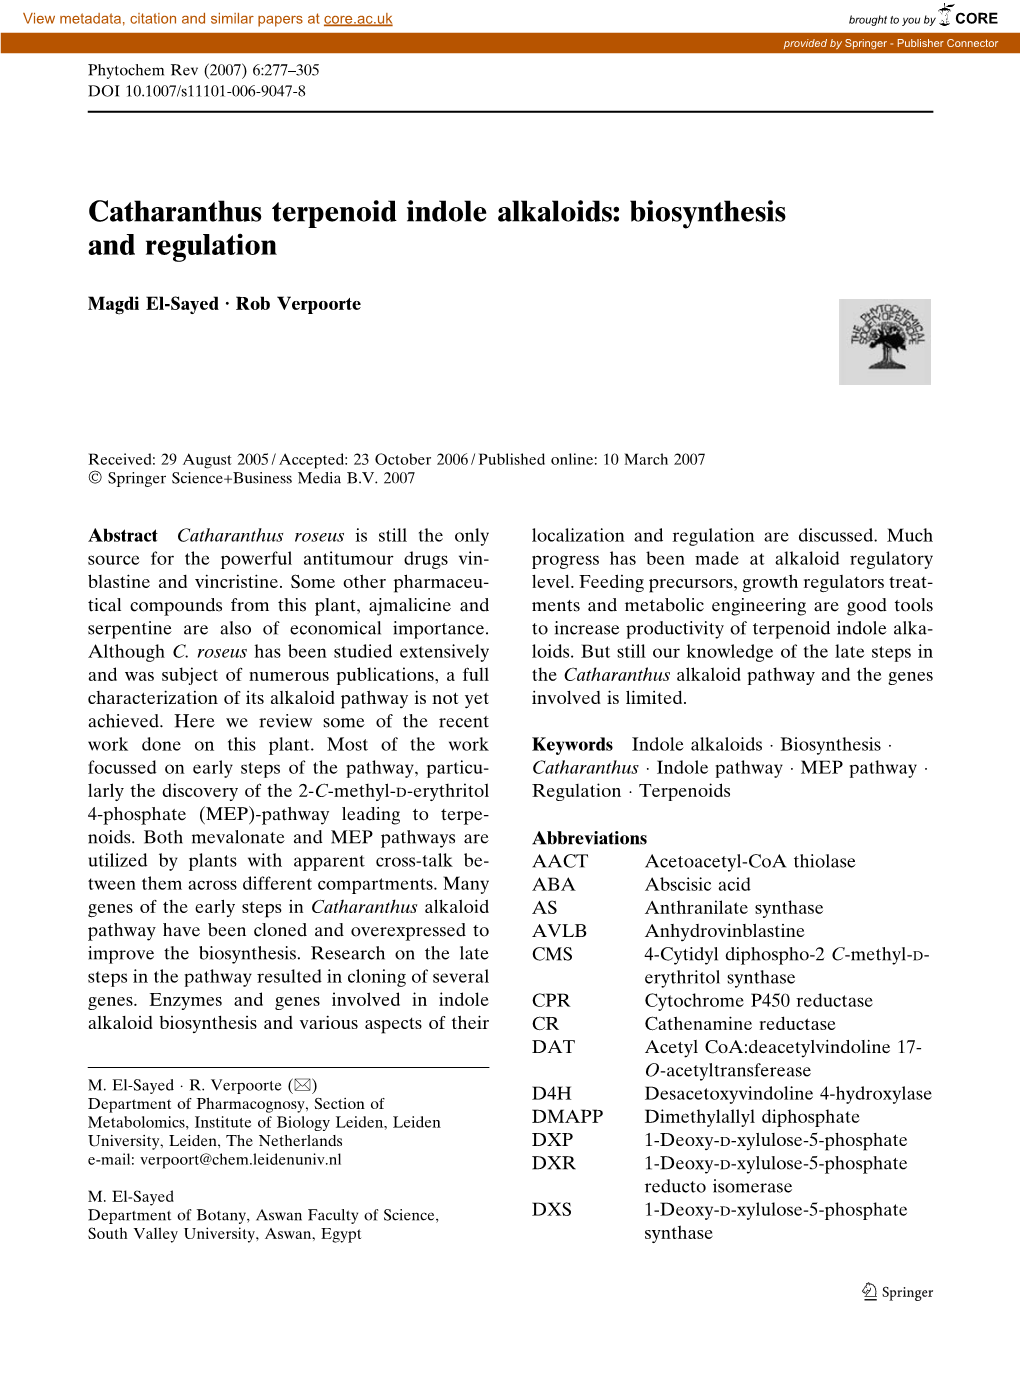 Catharanthus Terpenoid Indole Alkaloids: Biosynthesis and Regulation